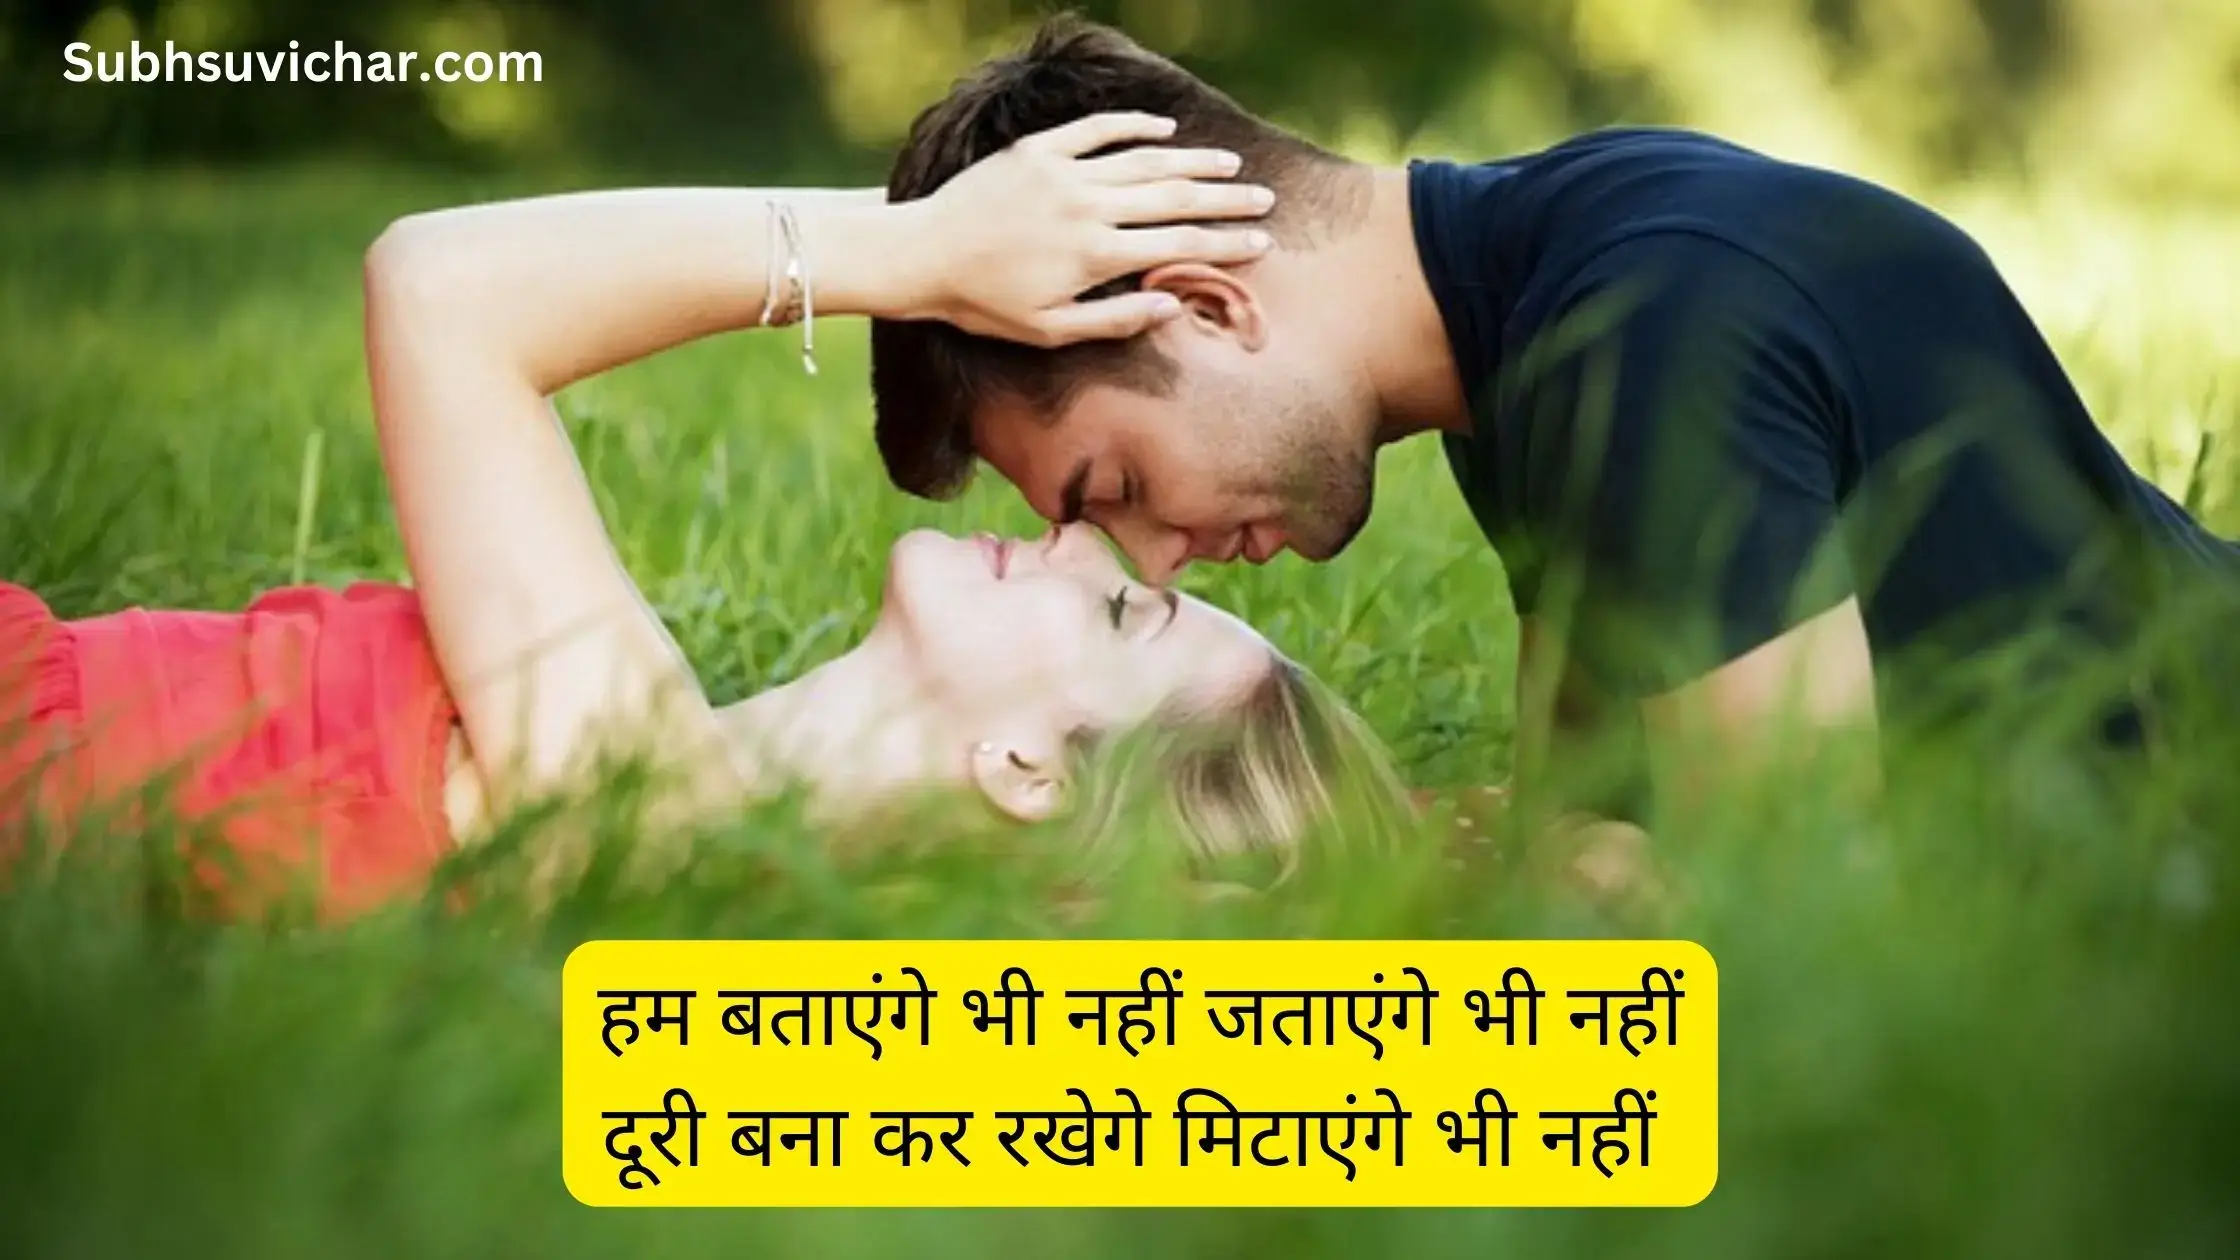 This post contains huge collection of instagram shayari in hindi font with high quality images for your whatsaap and facebook status.